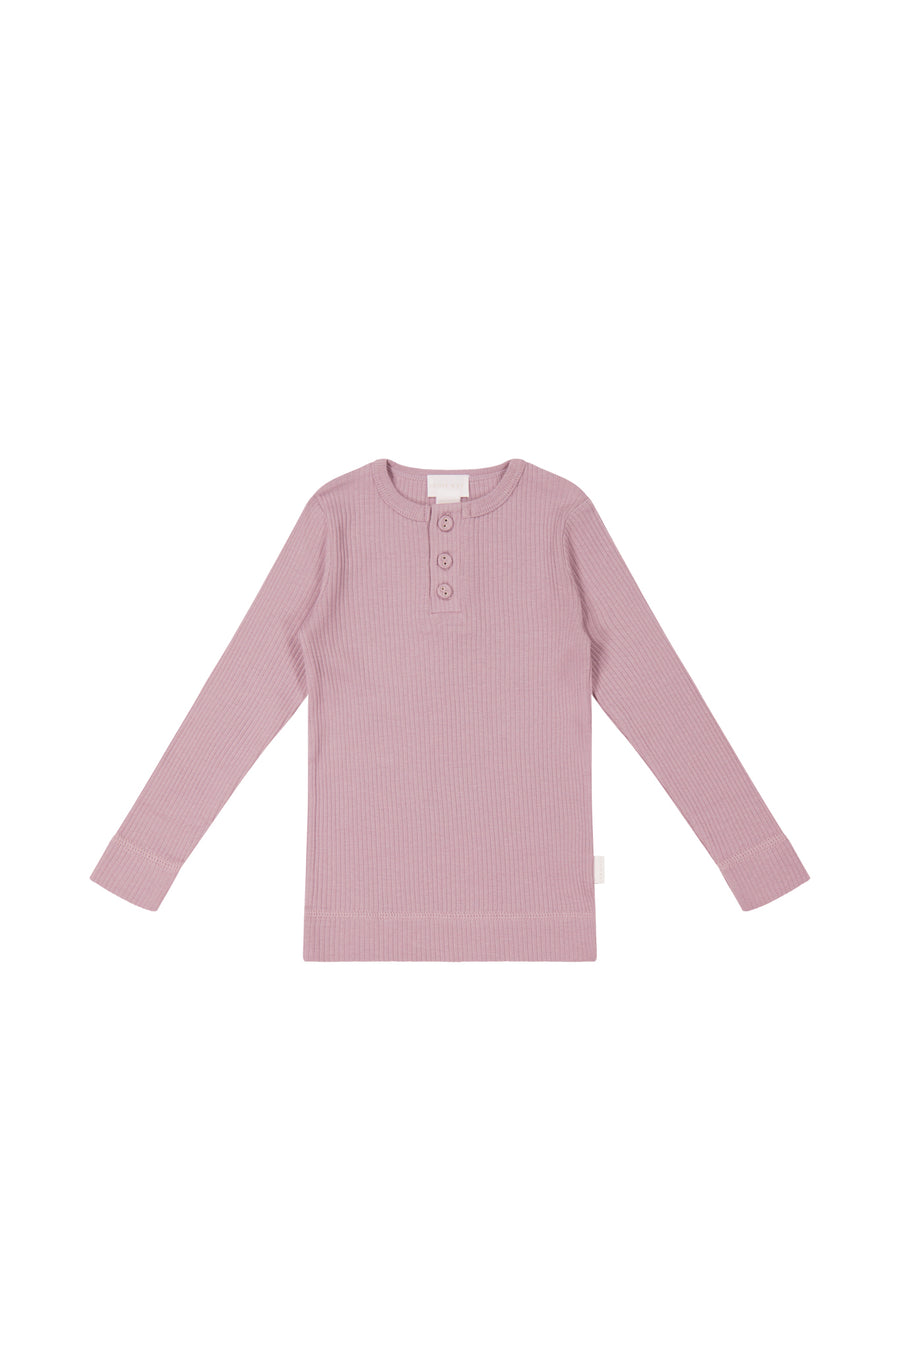 Organic Cotton Modal Long Sleeve Henley - Vintage Violet Childrens Top from Jamie Kay NZ